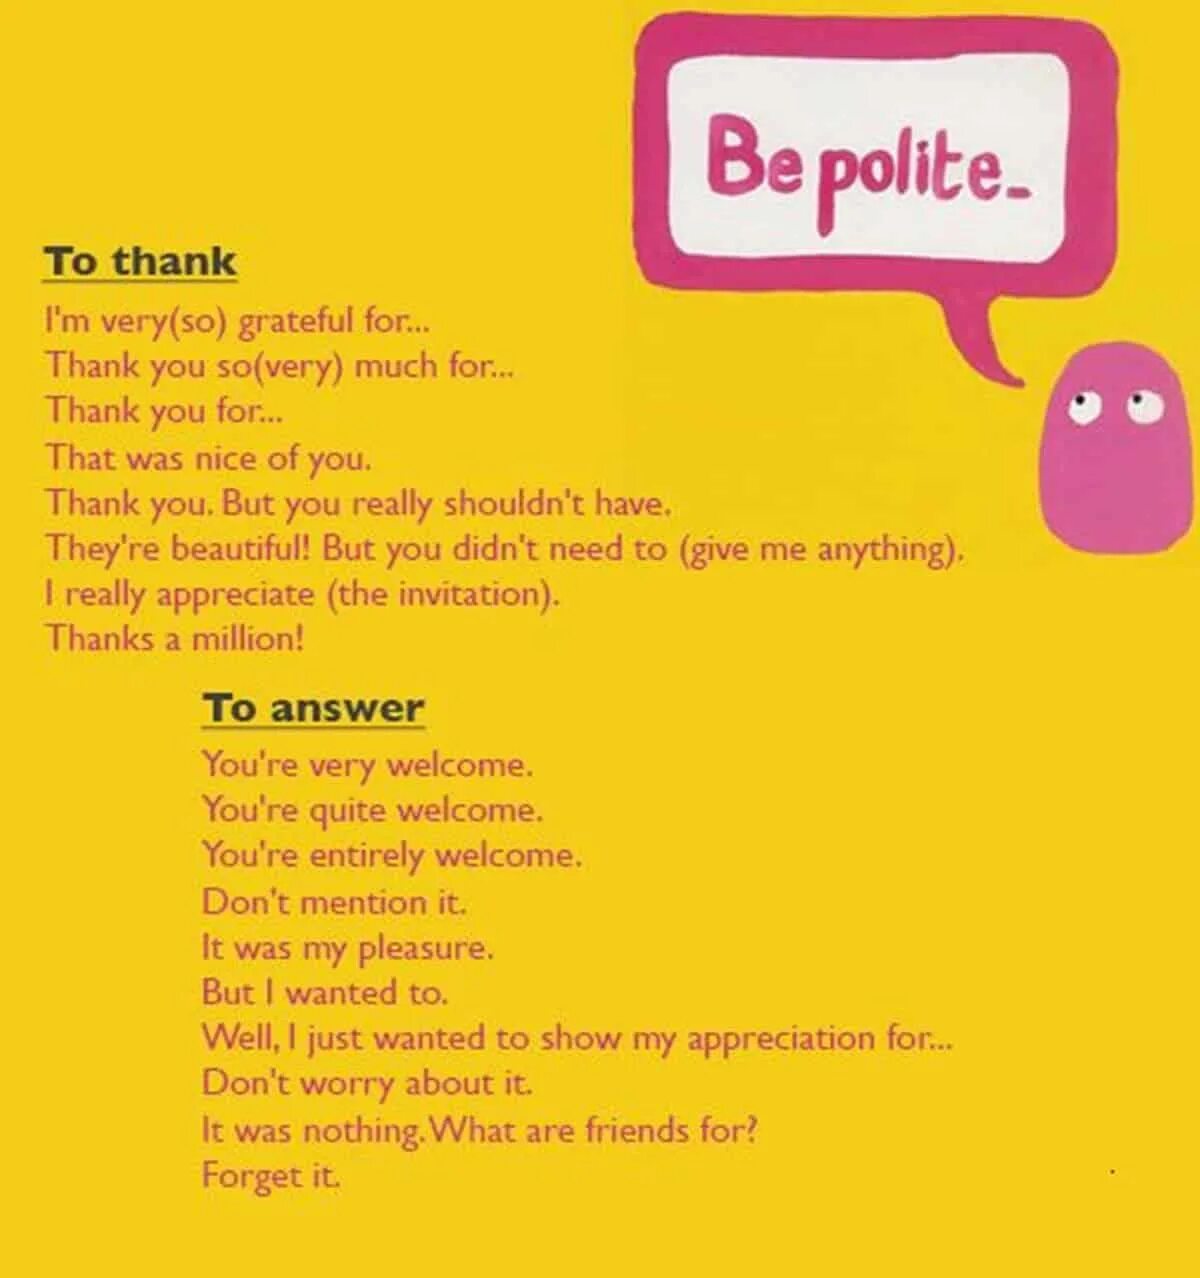 Polite phrases in English. How to be polite. How to be polite in English. Thank you in English. How are you reply